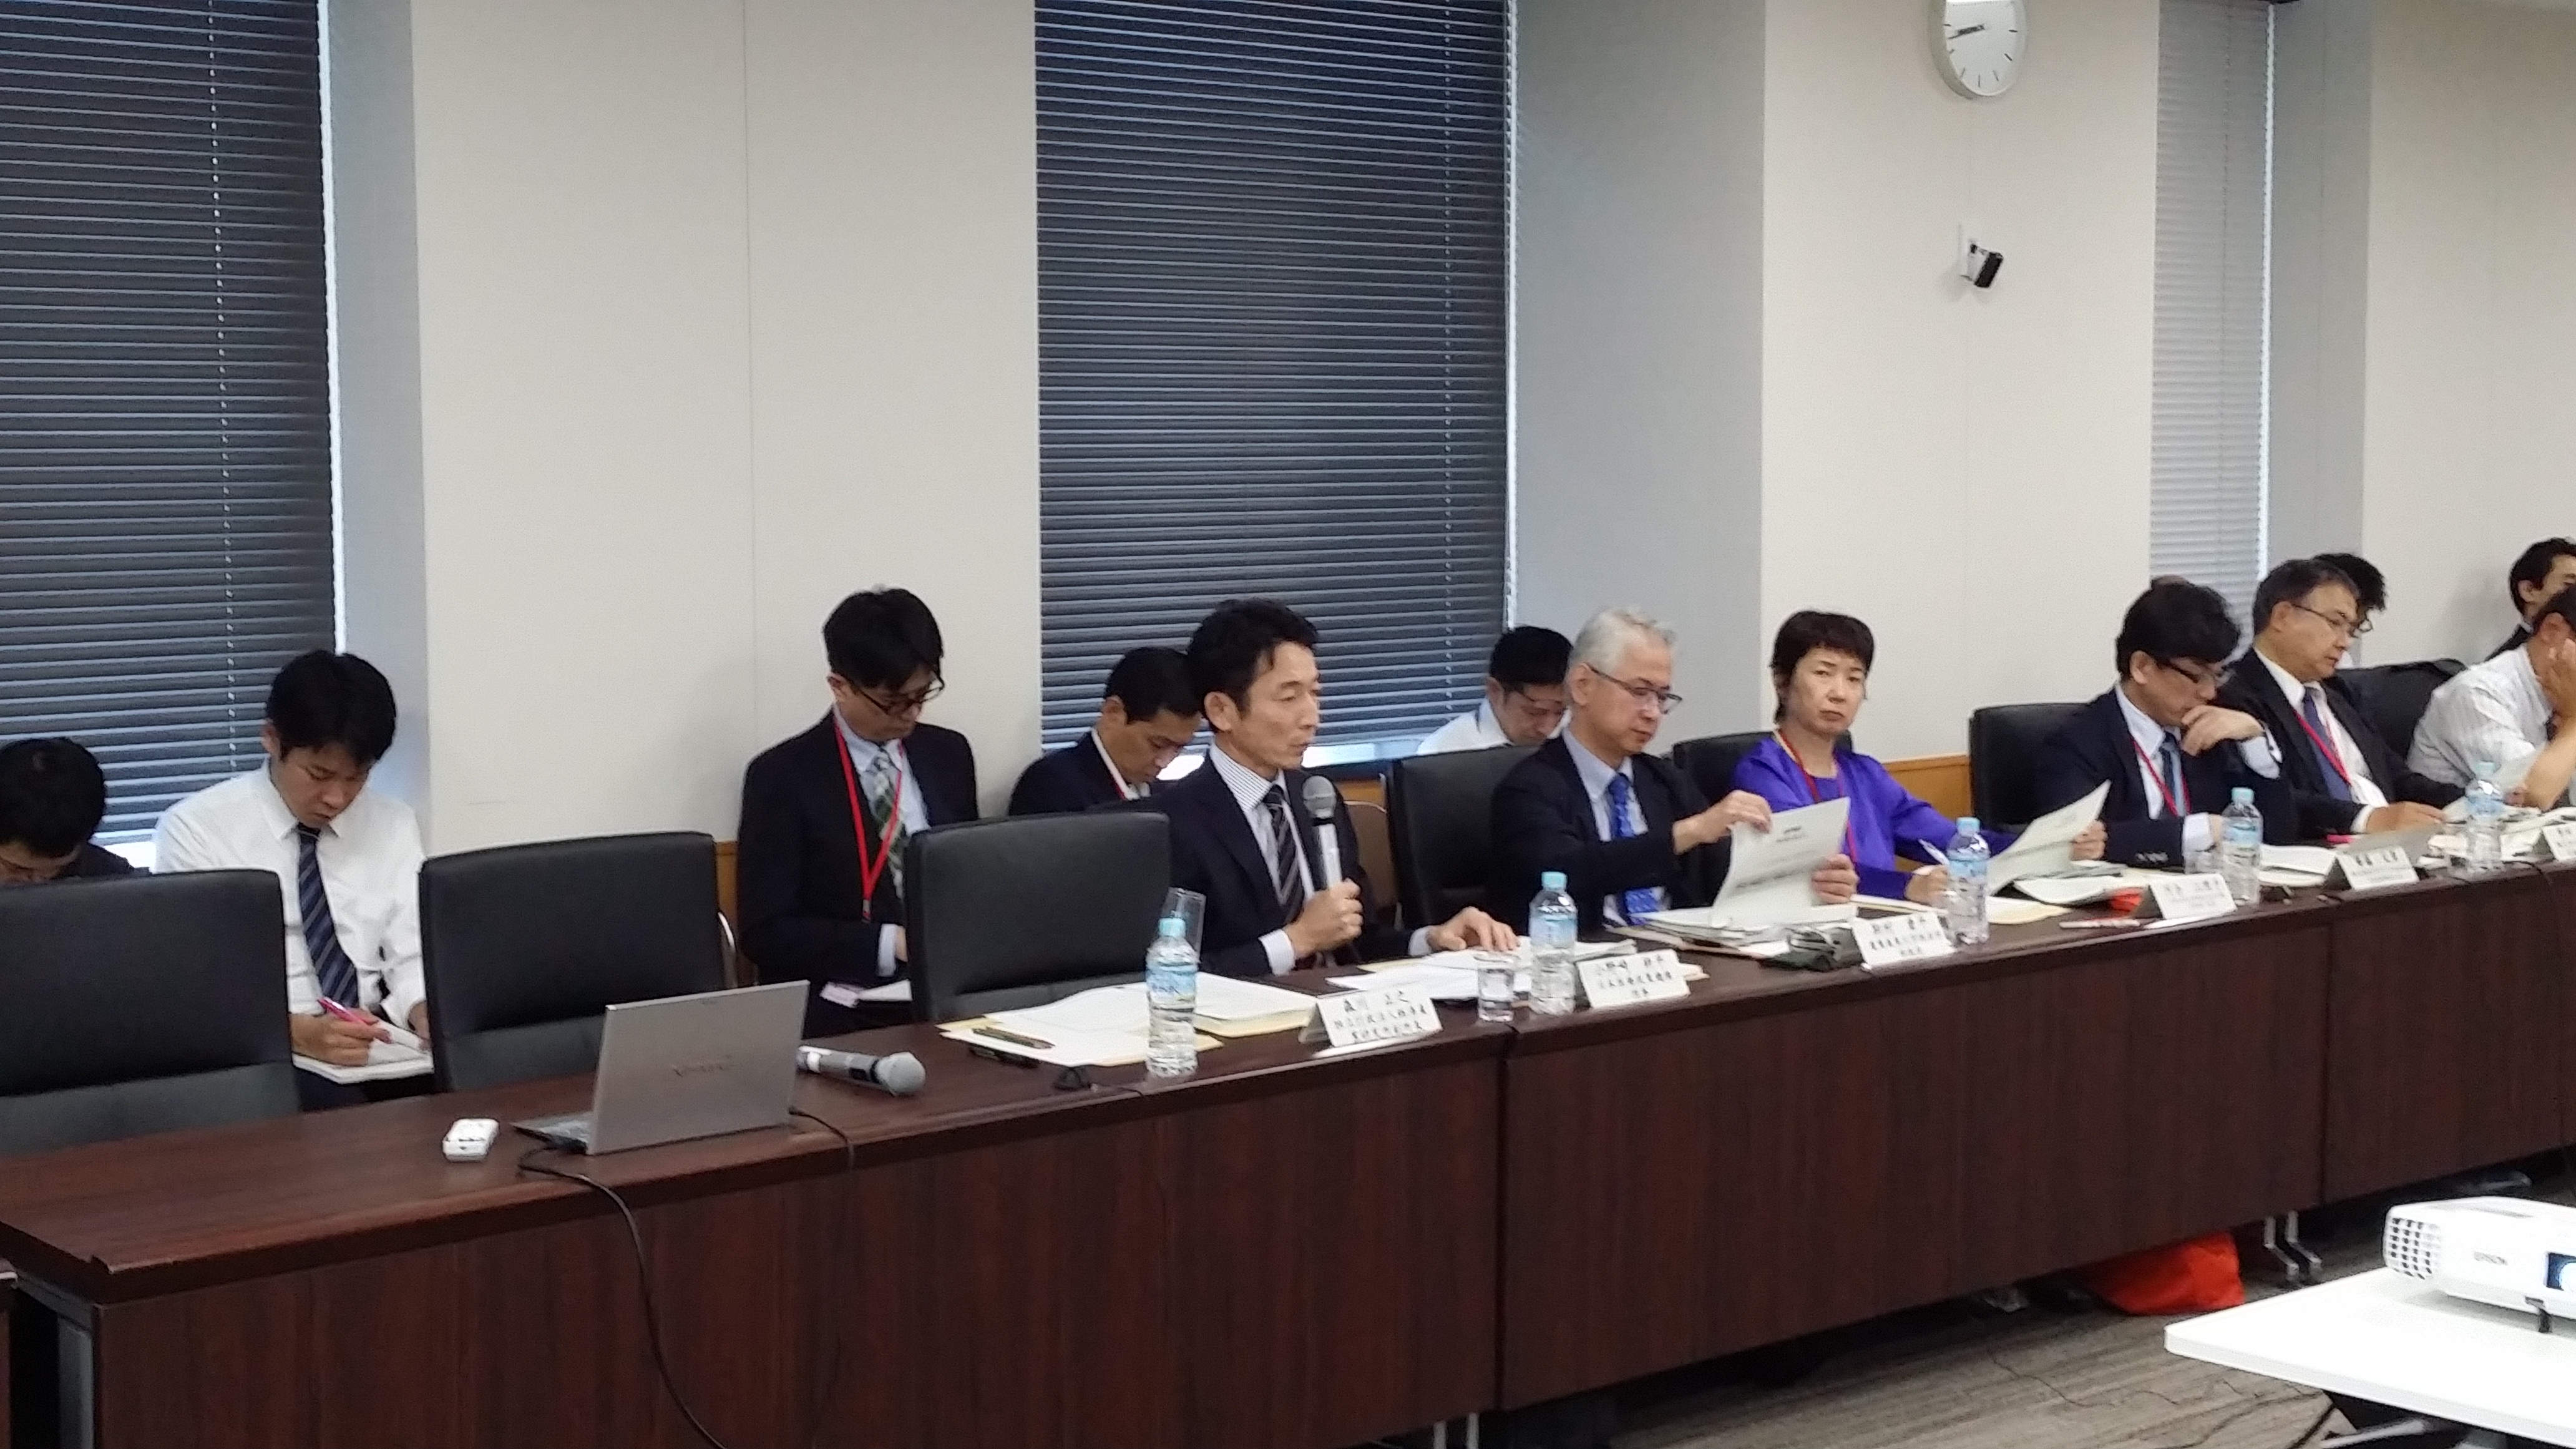 (Lecture) A report at the second meeting titled ” Future prospects in Japan 2030 and task force on restructuring” included in the Council on Economic and Fiscal Policy(October 20, 2016）